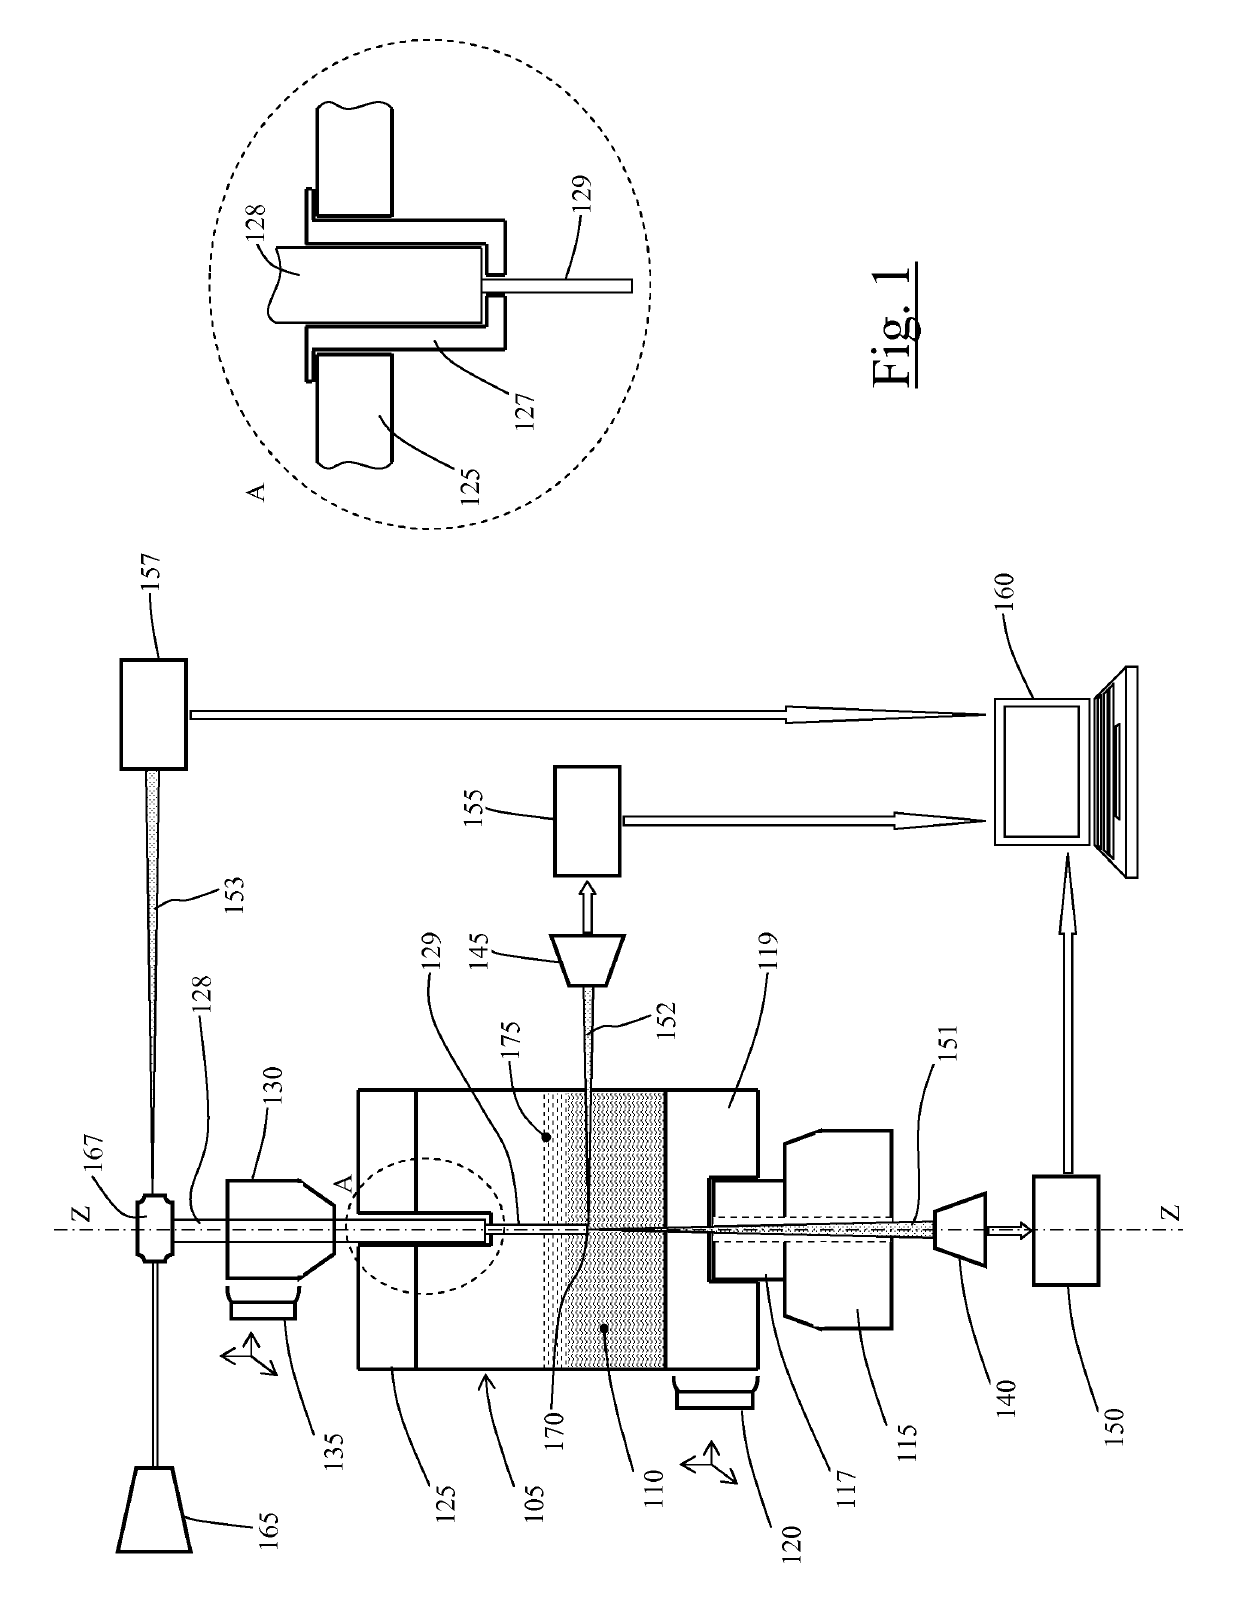 Method of fabricating structures, starting from material rods